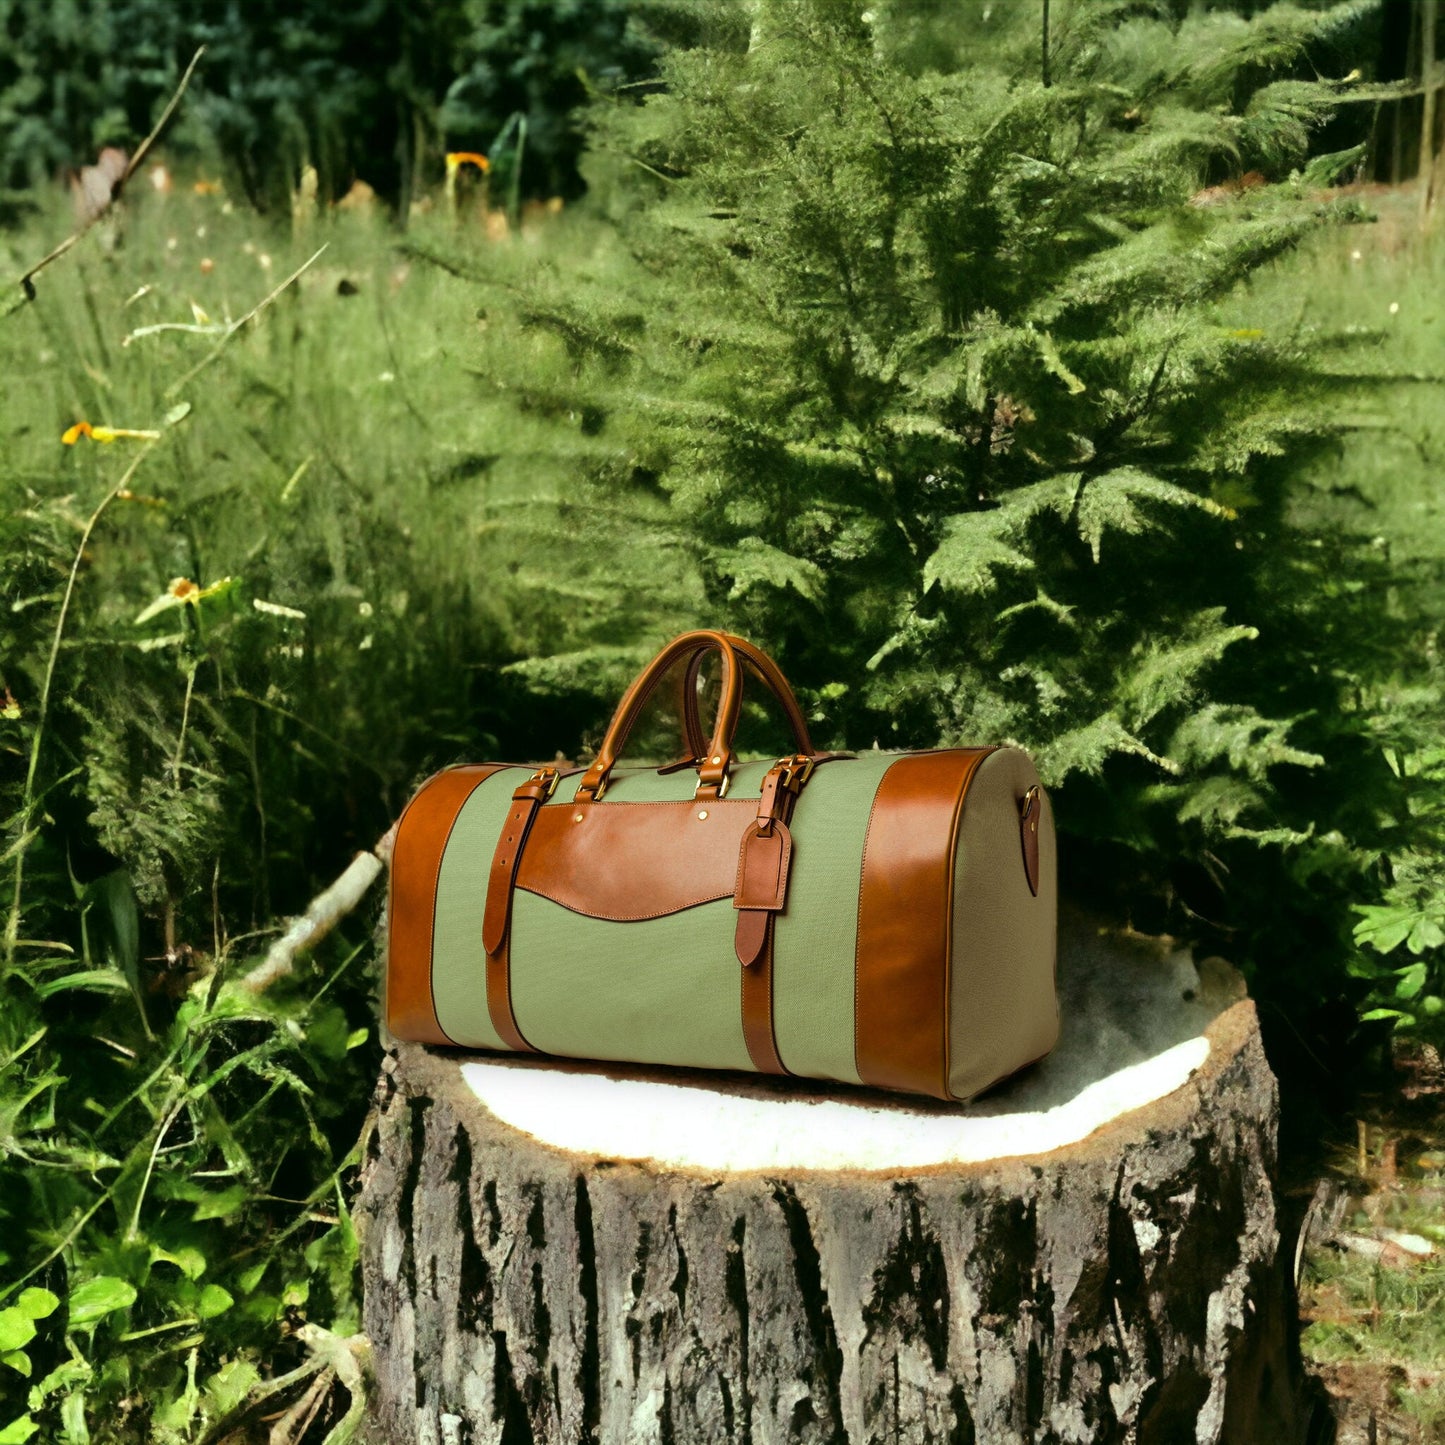 Weekend Bag | Canvas - Dark Brown Leather | Duffle Bag | Handmade Duffle Bag  | Travel | Leather Bag | Duffle Purse Crossbody | Limited  99percenthandmade Green - Tan Small - Liner No 